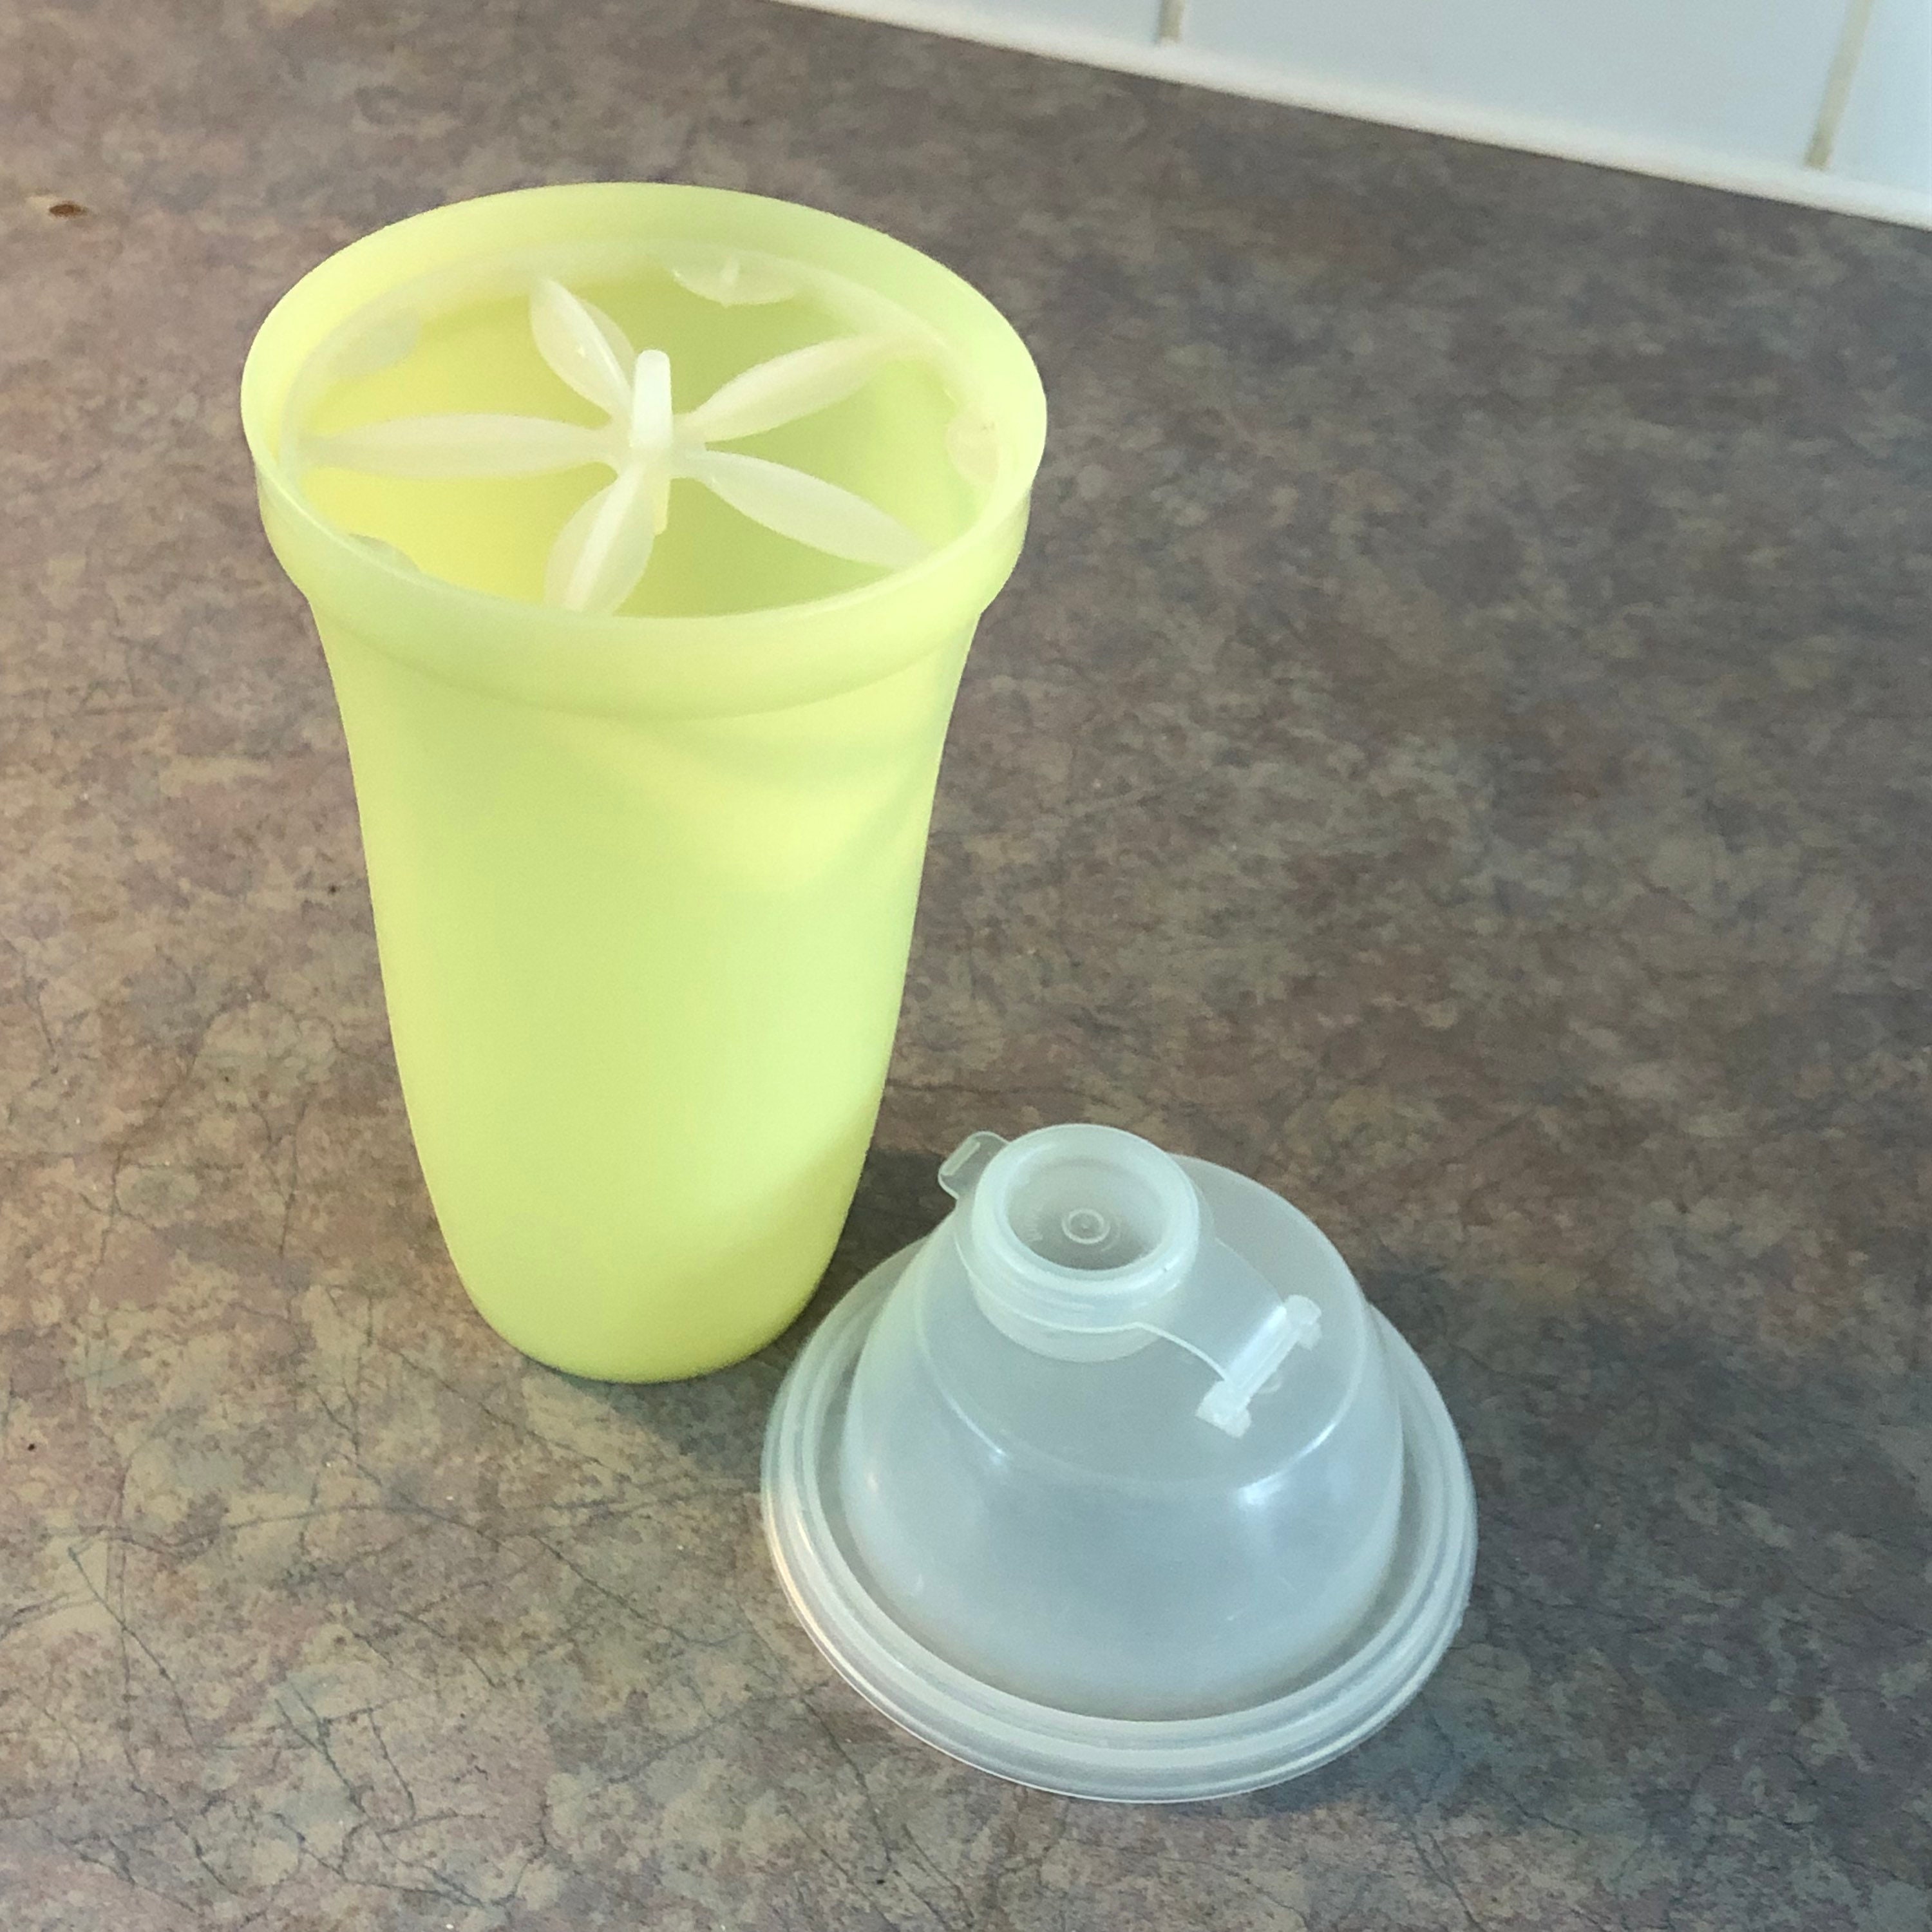 Vintage 70's Yellow Tupperware Gravy Mixer With Lid and Inside